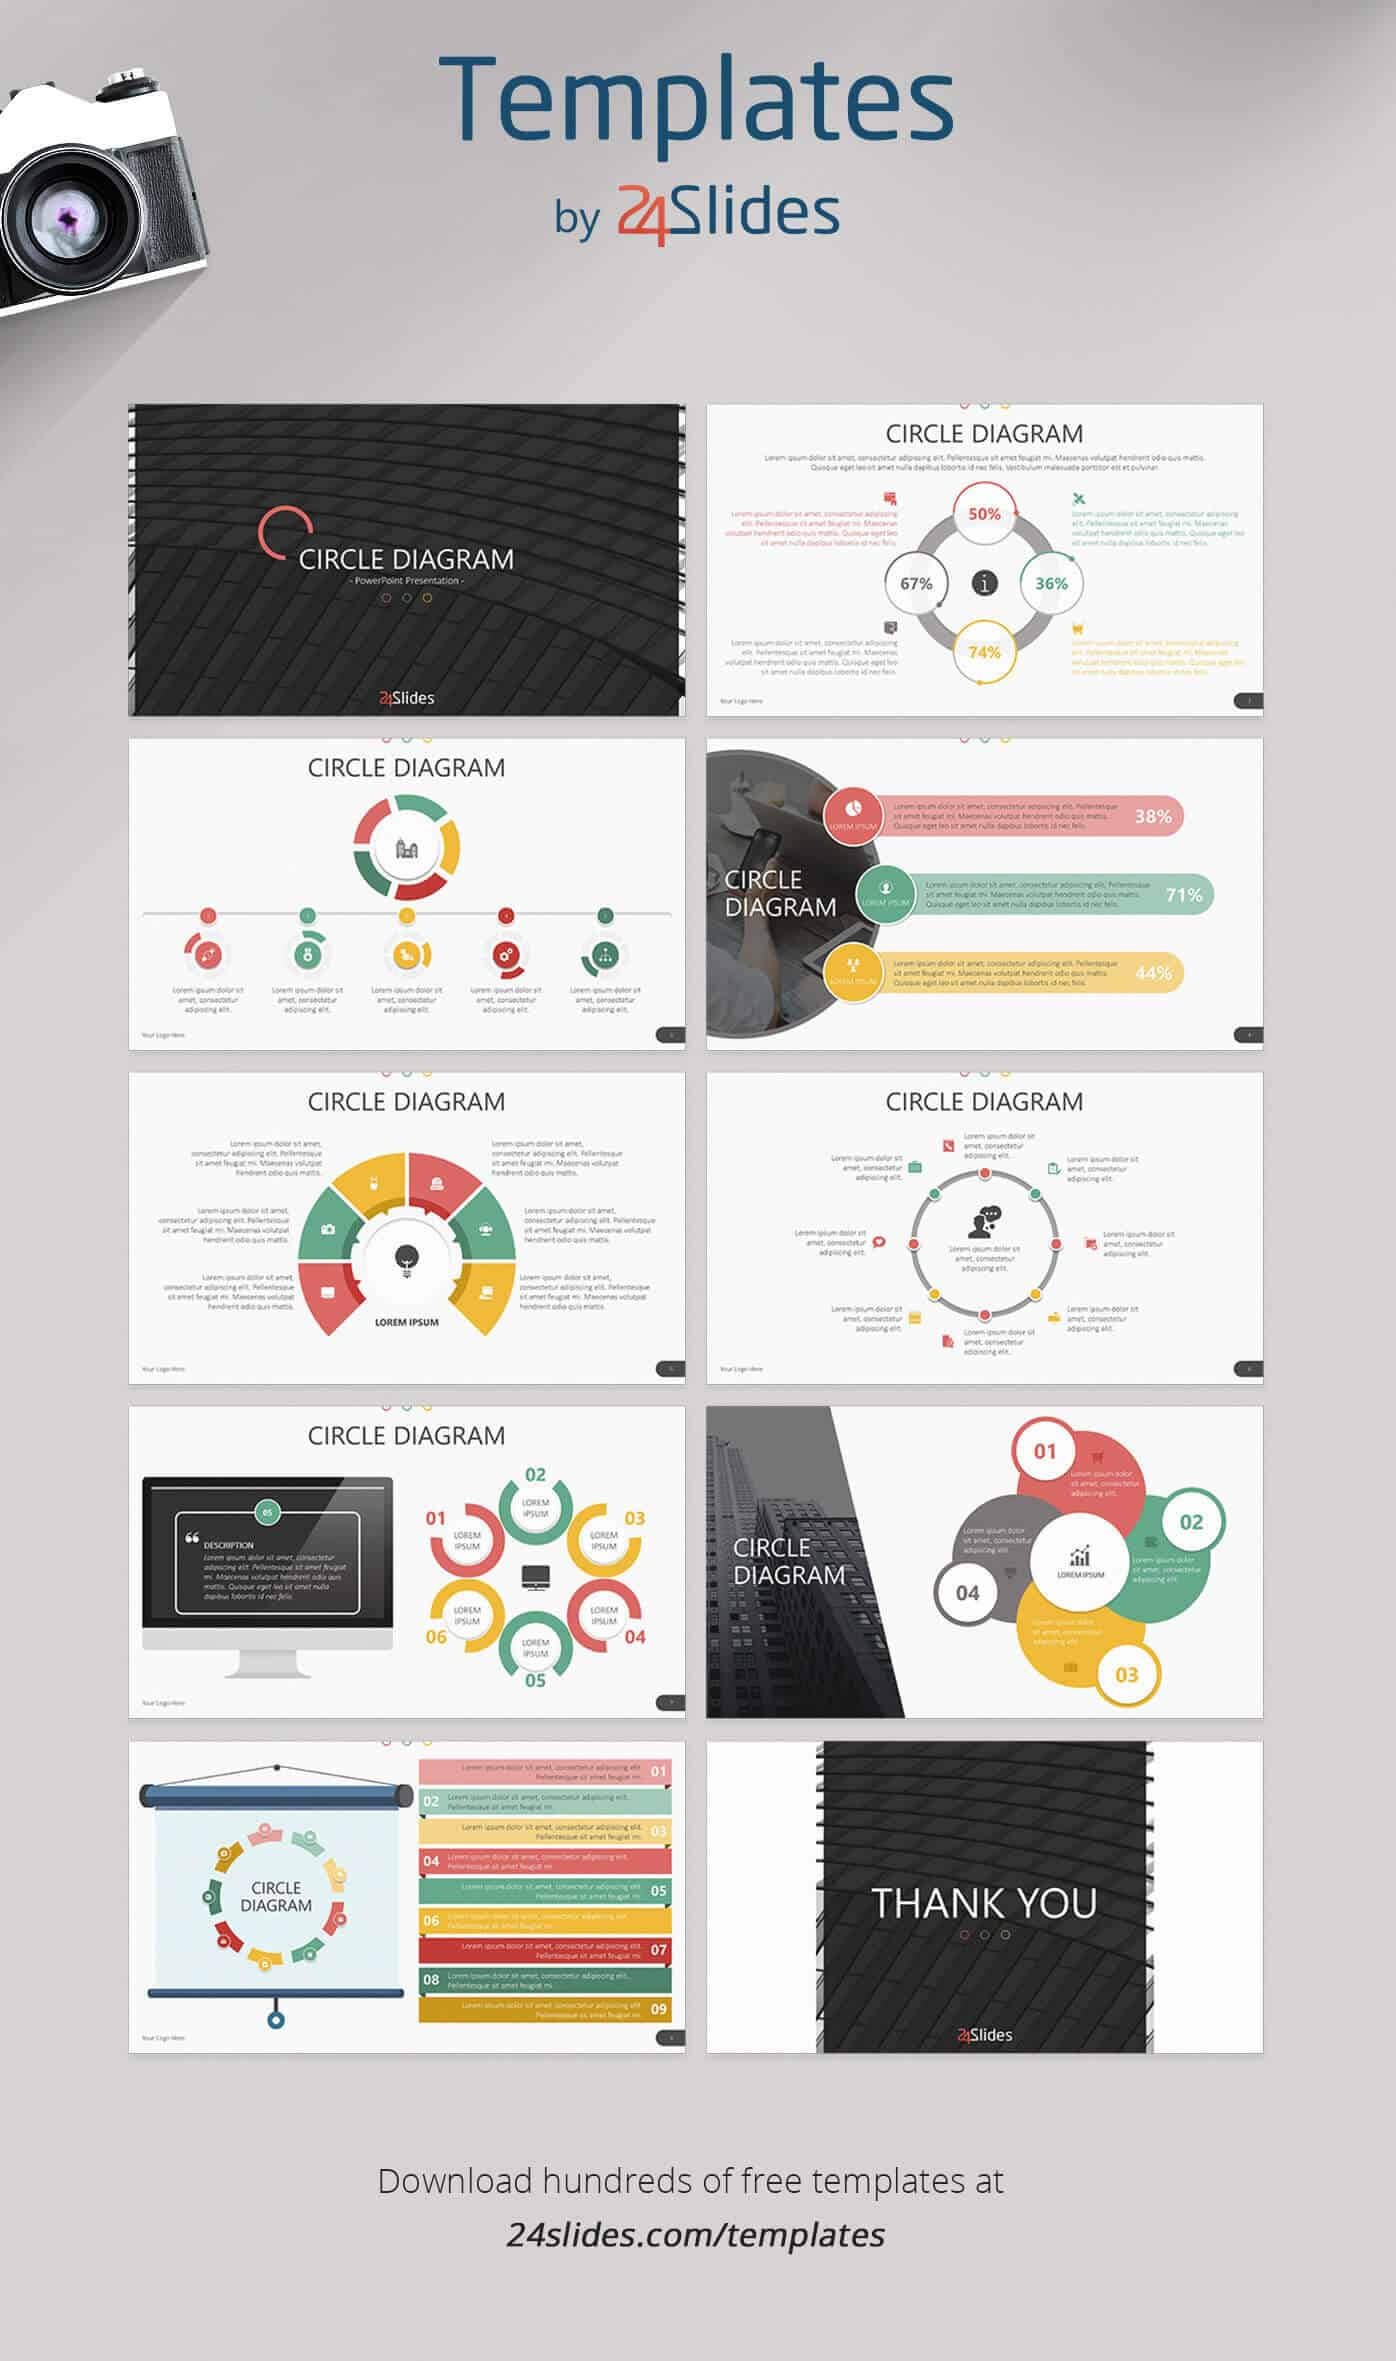 15 Fun And Colorful Free Powerpoint Templates | Present Better Pertaining To Fun Powerpoint Templates Free Download